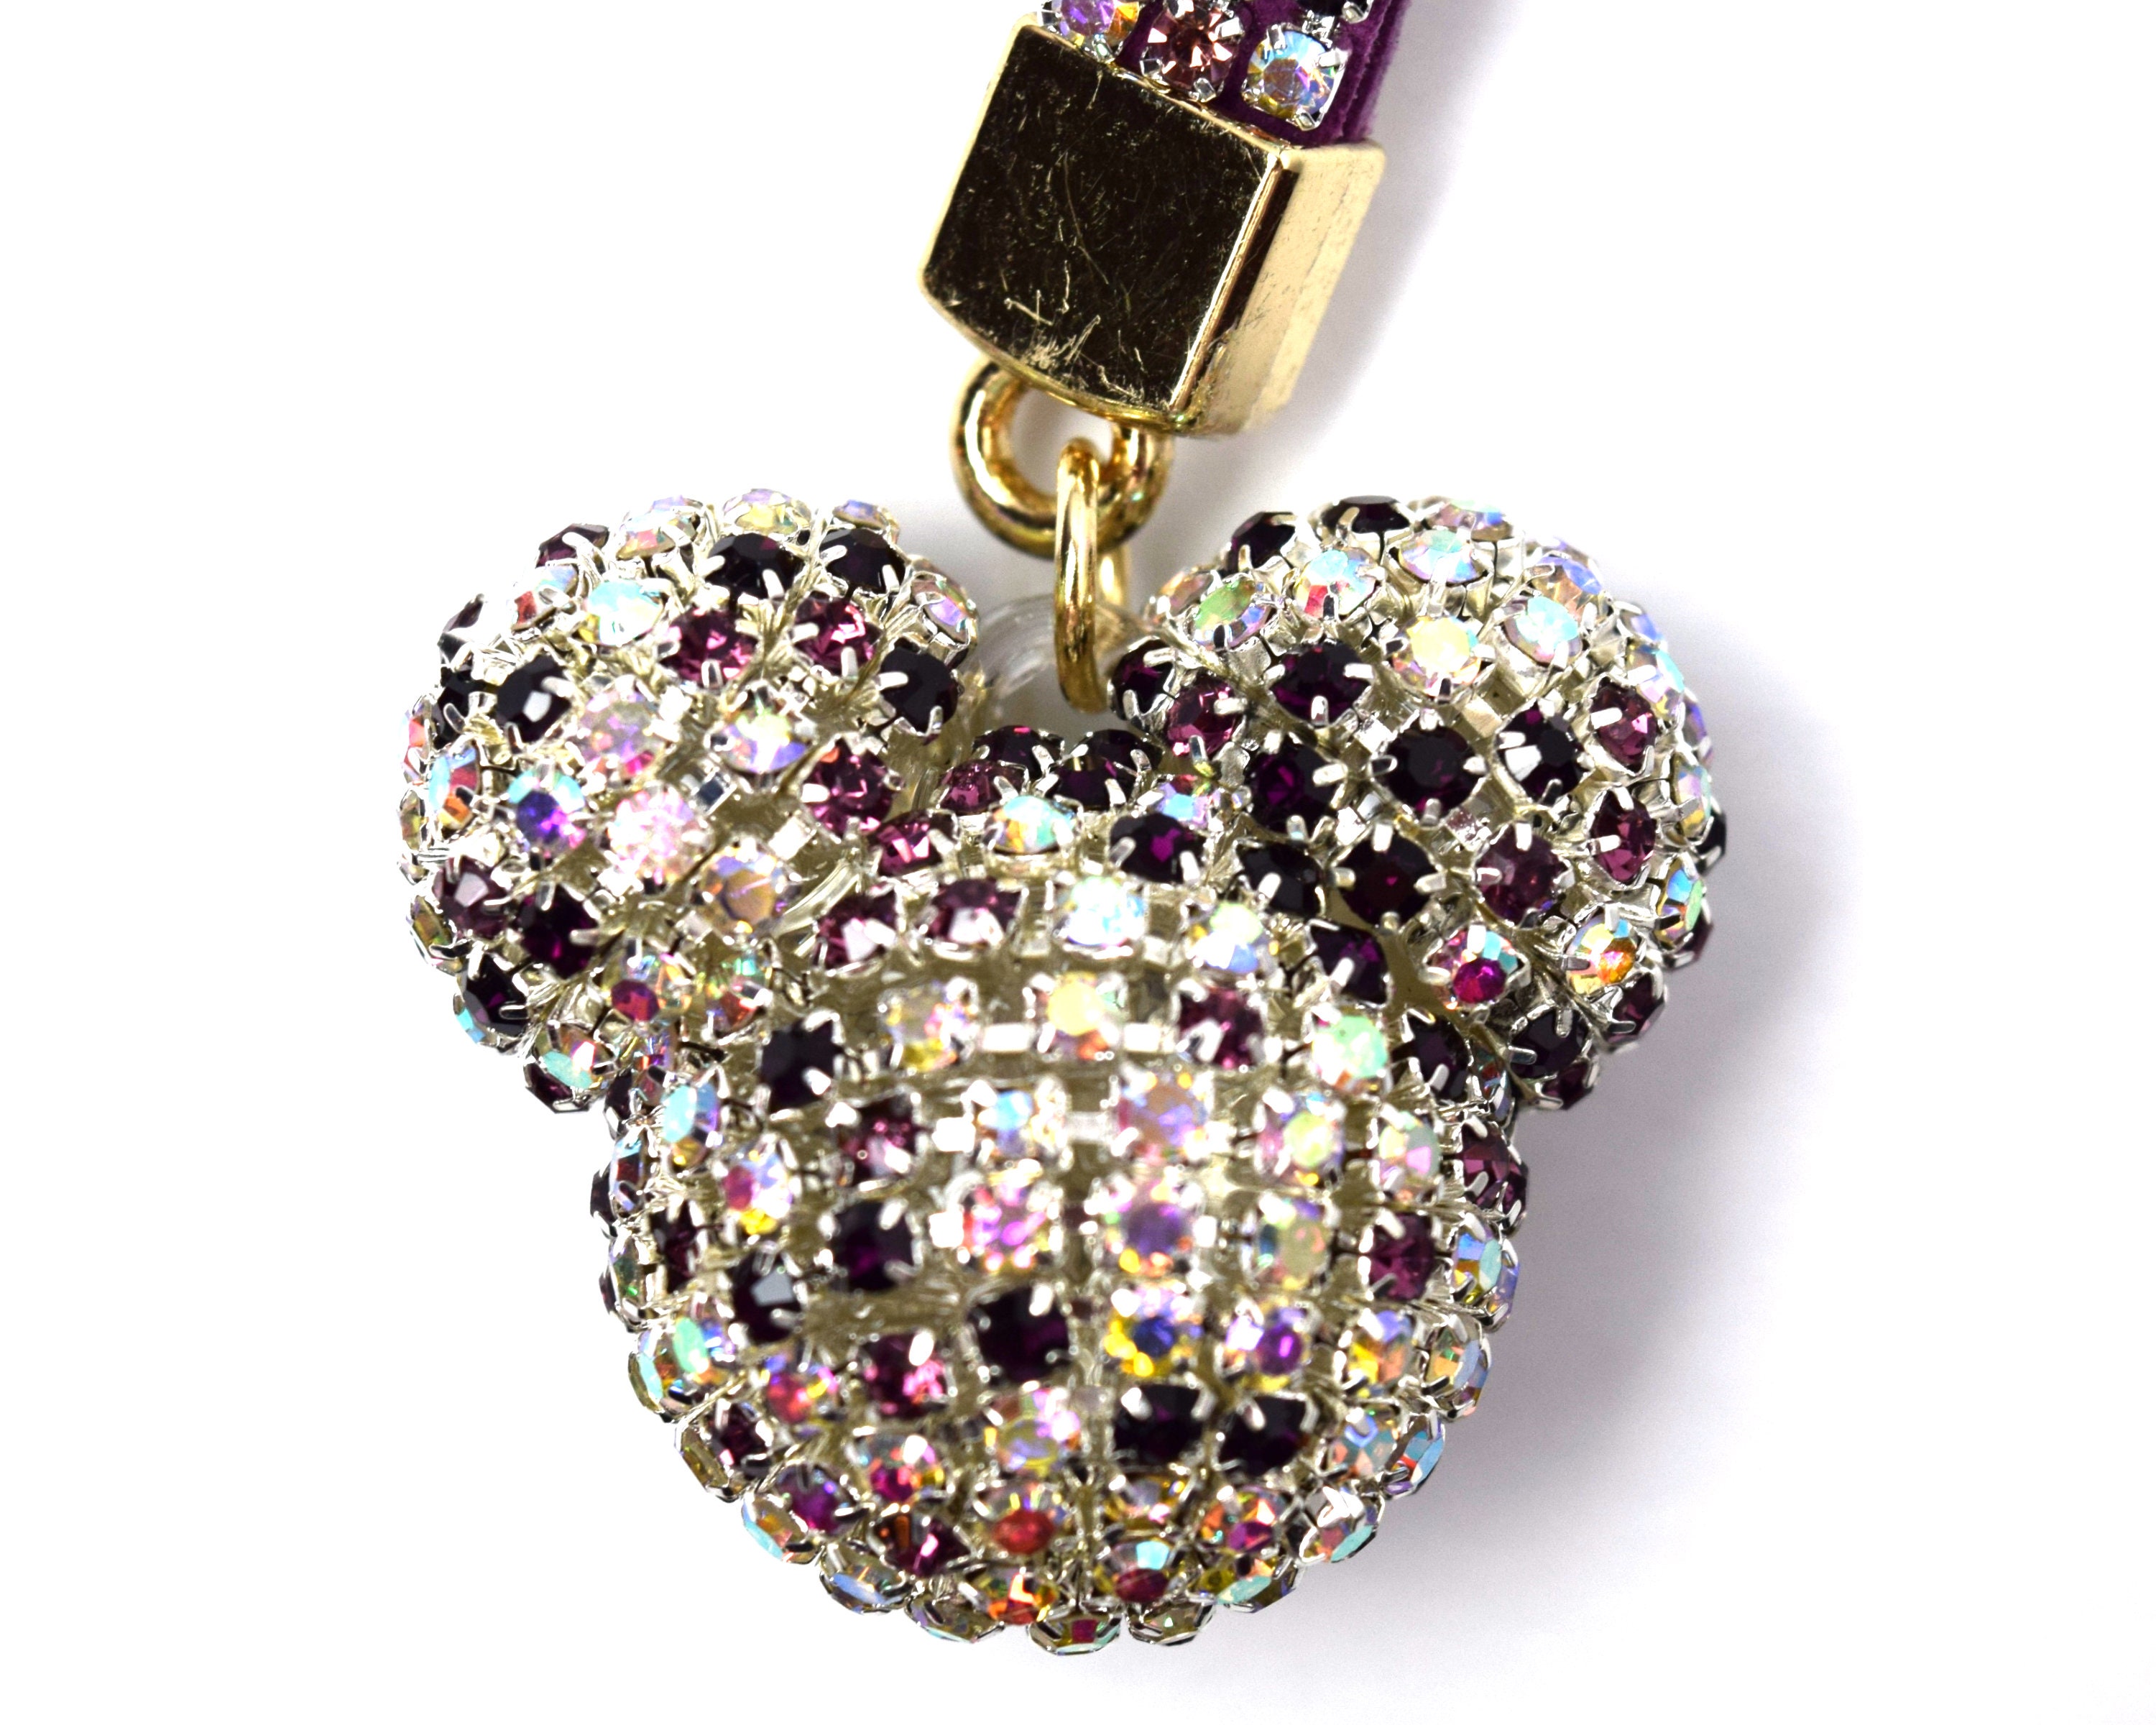 MINNIE MOUSE PENCIL Bling Crystal Charm & Top PINK or DIAMOND CLEAR Black DISNEY 